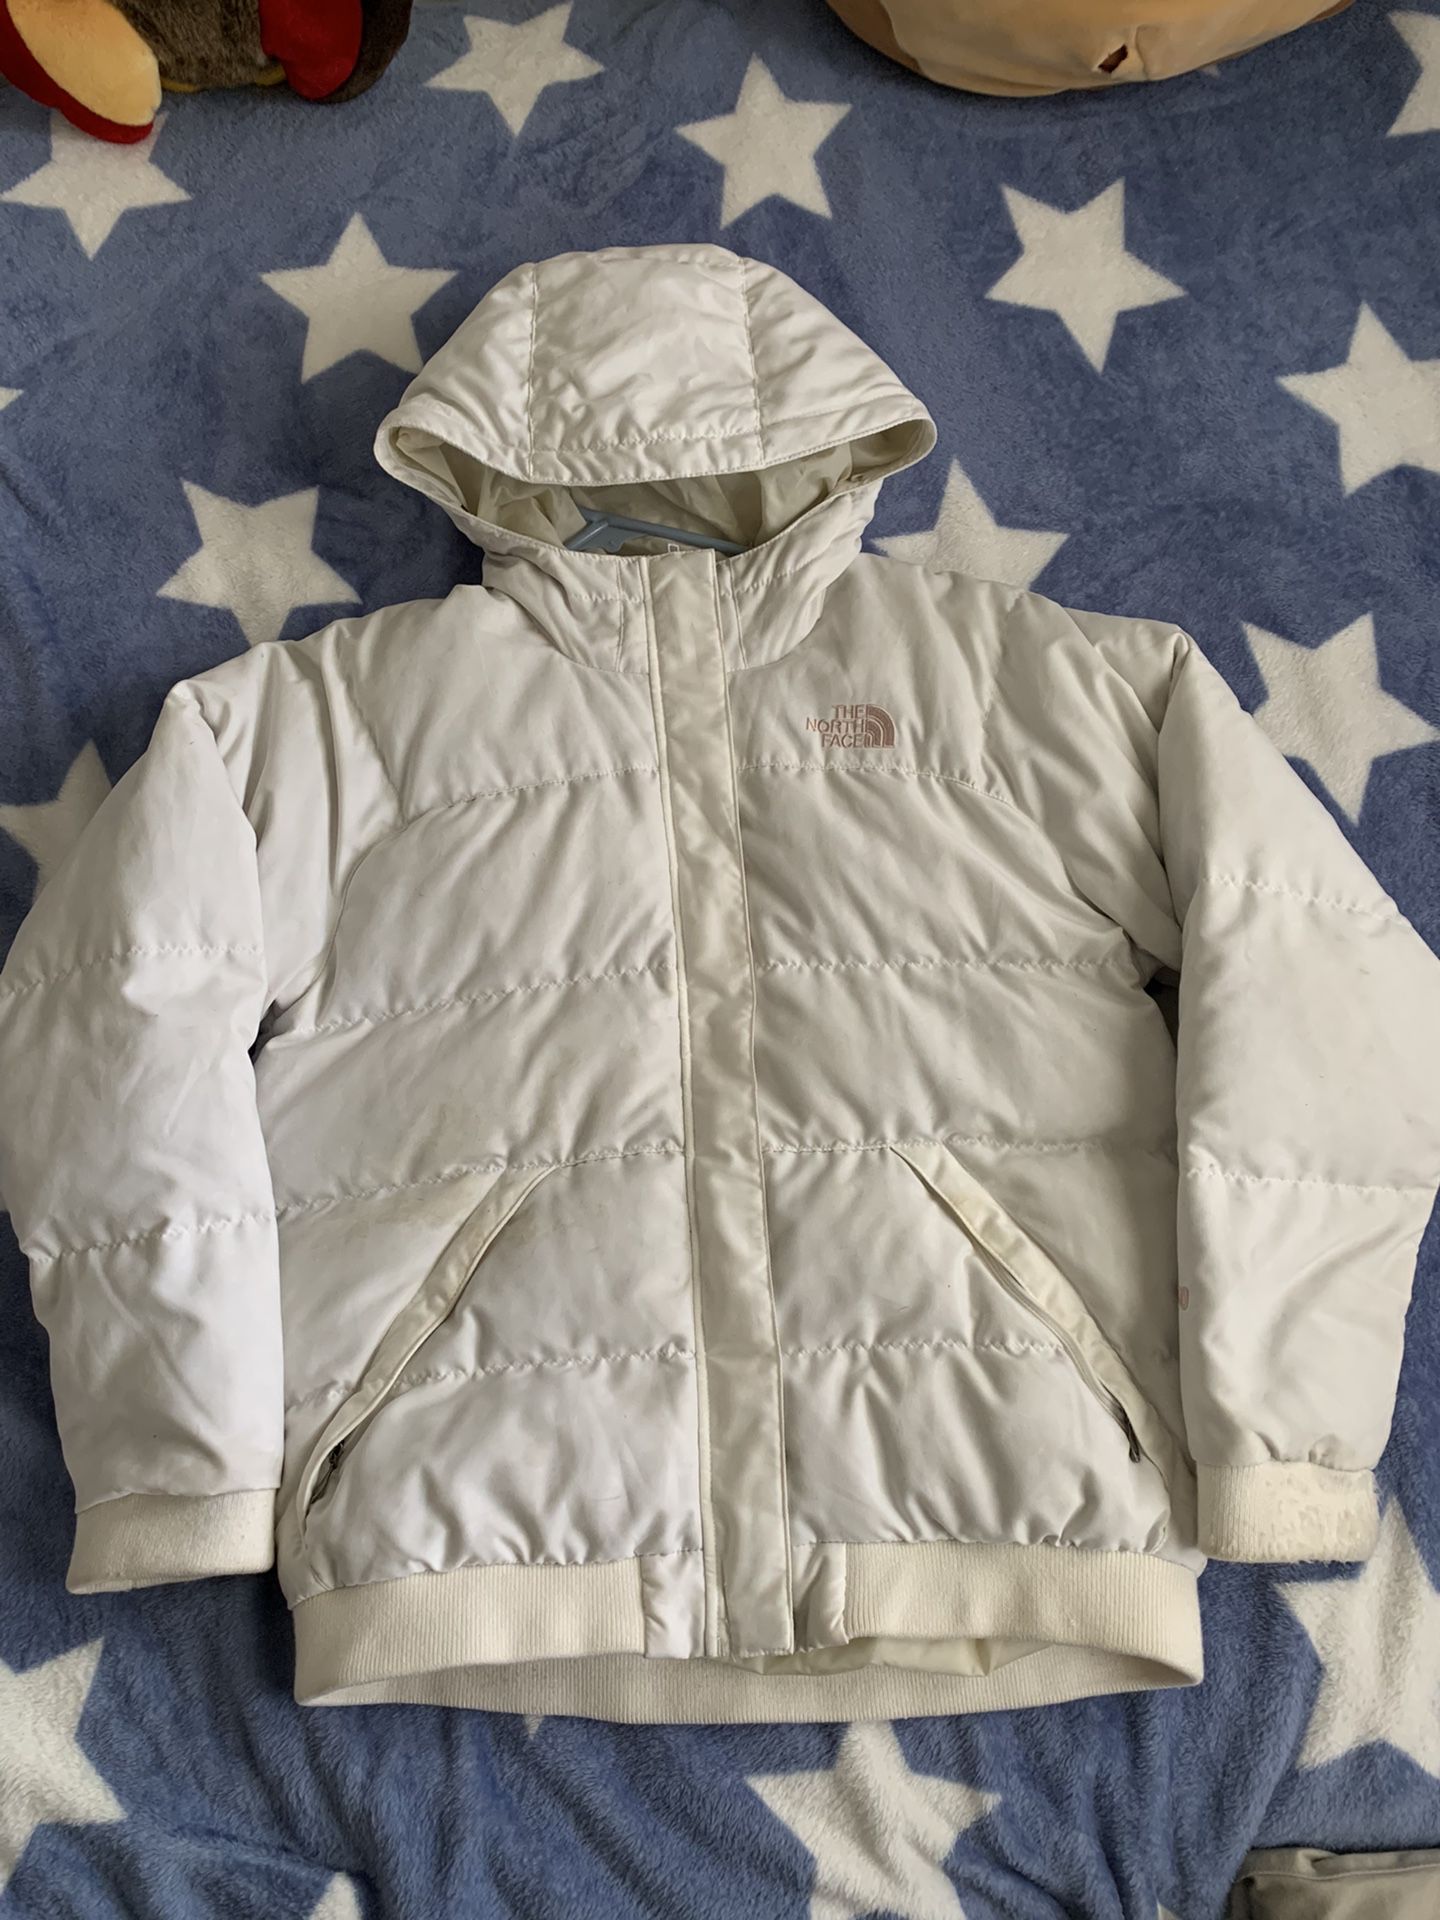 north face puffer jacket size XL in girls 